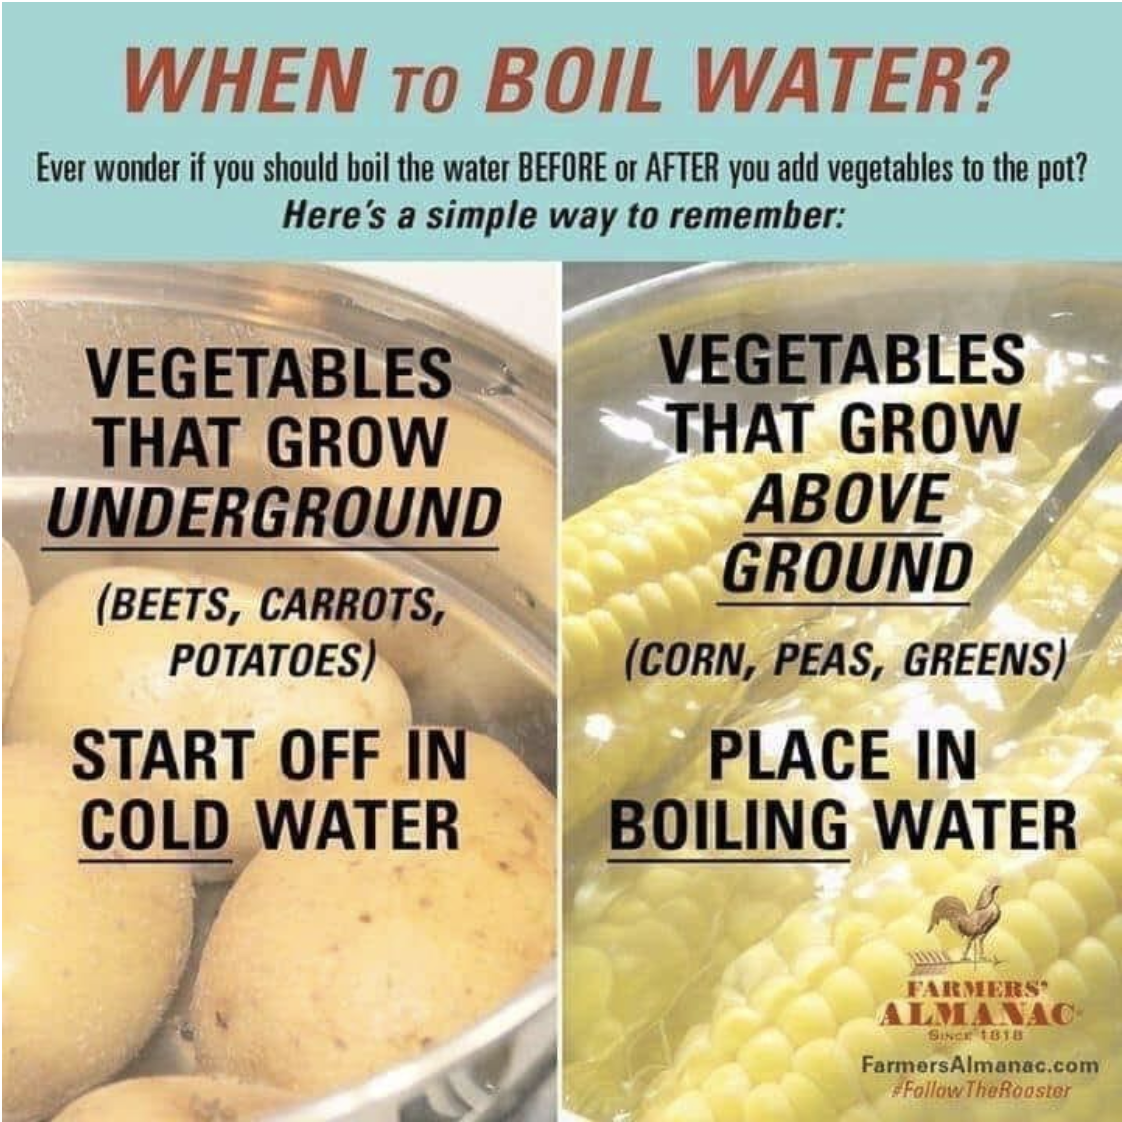 &quot;When to Boil Water&quot;